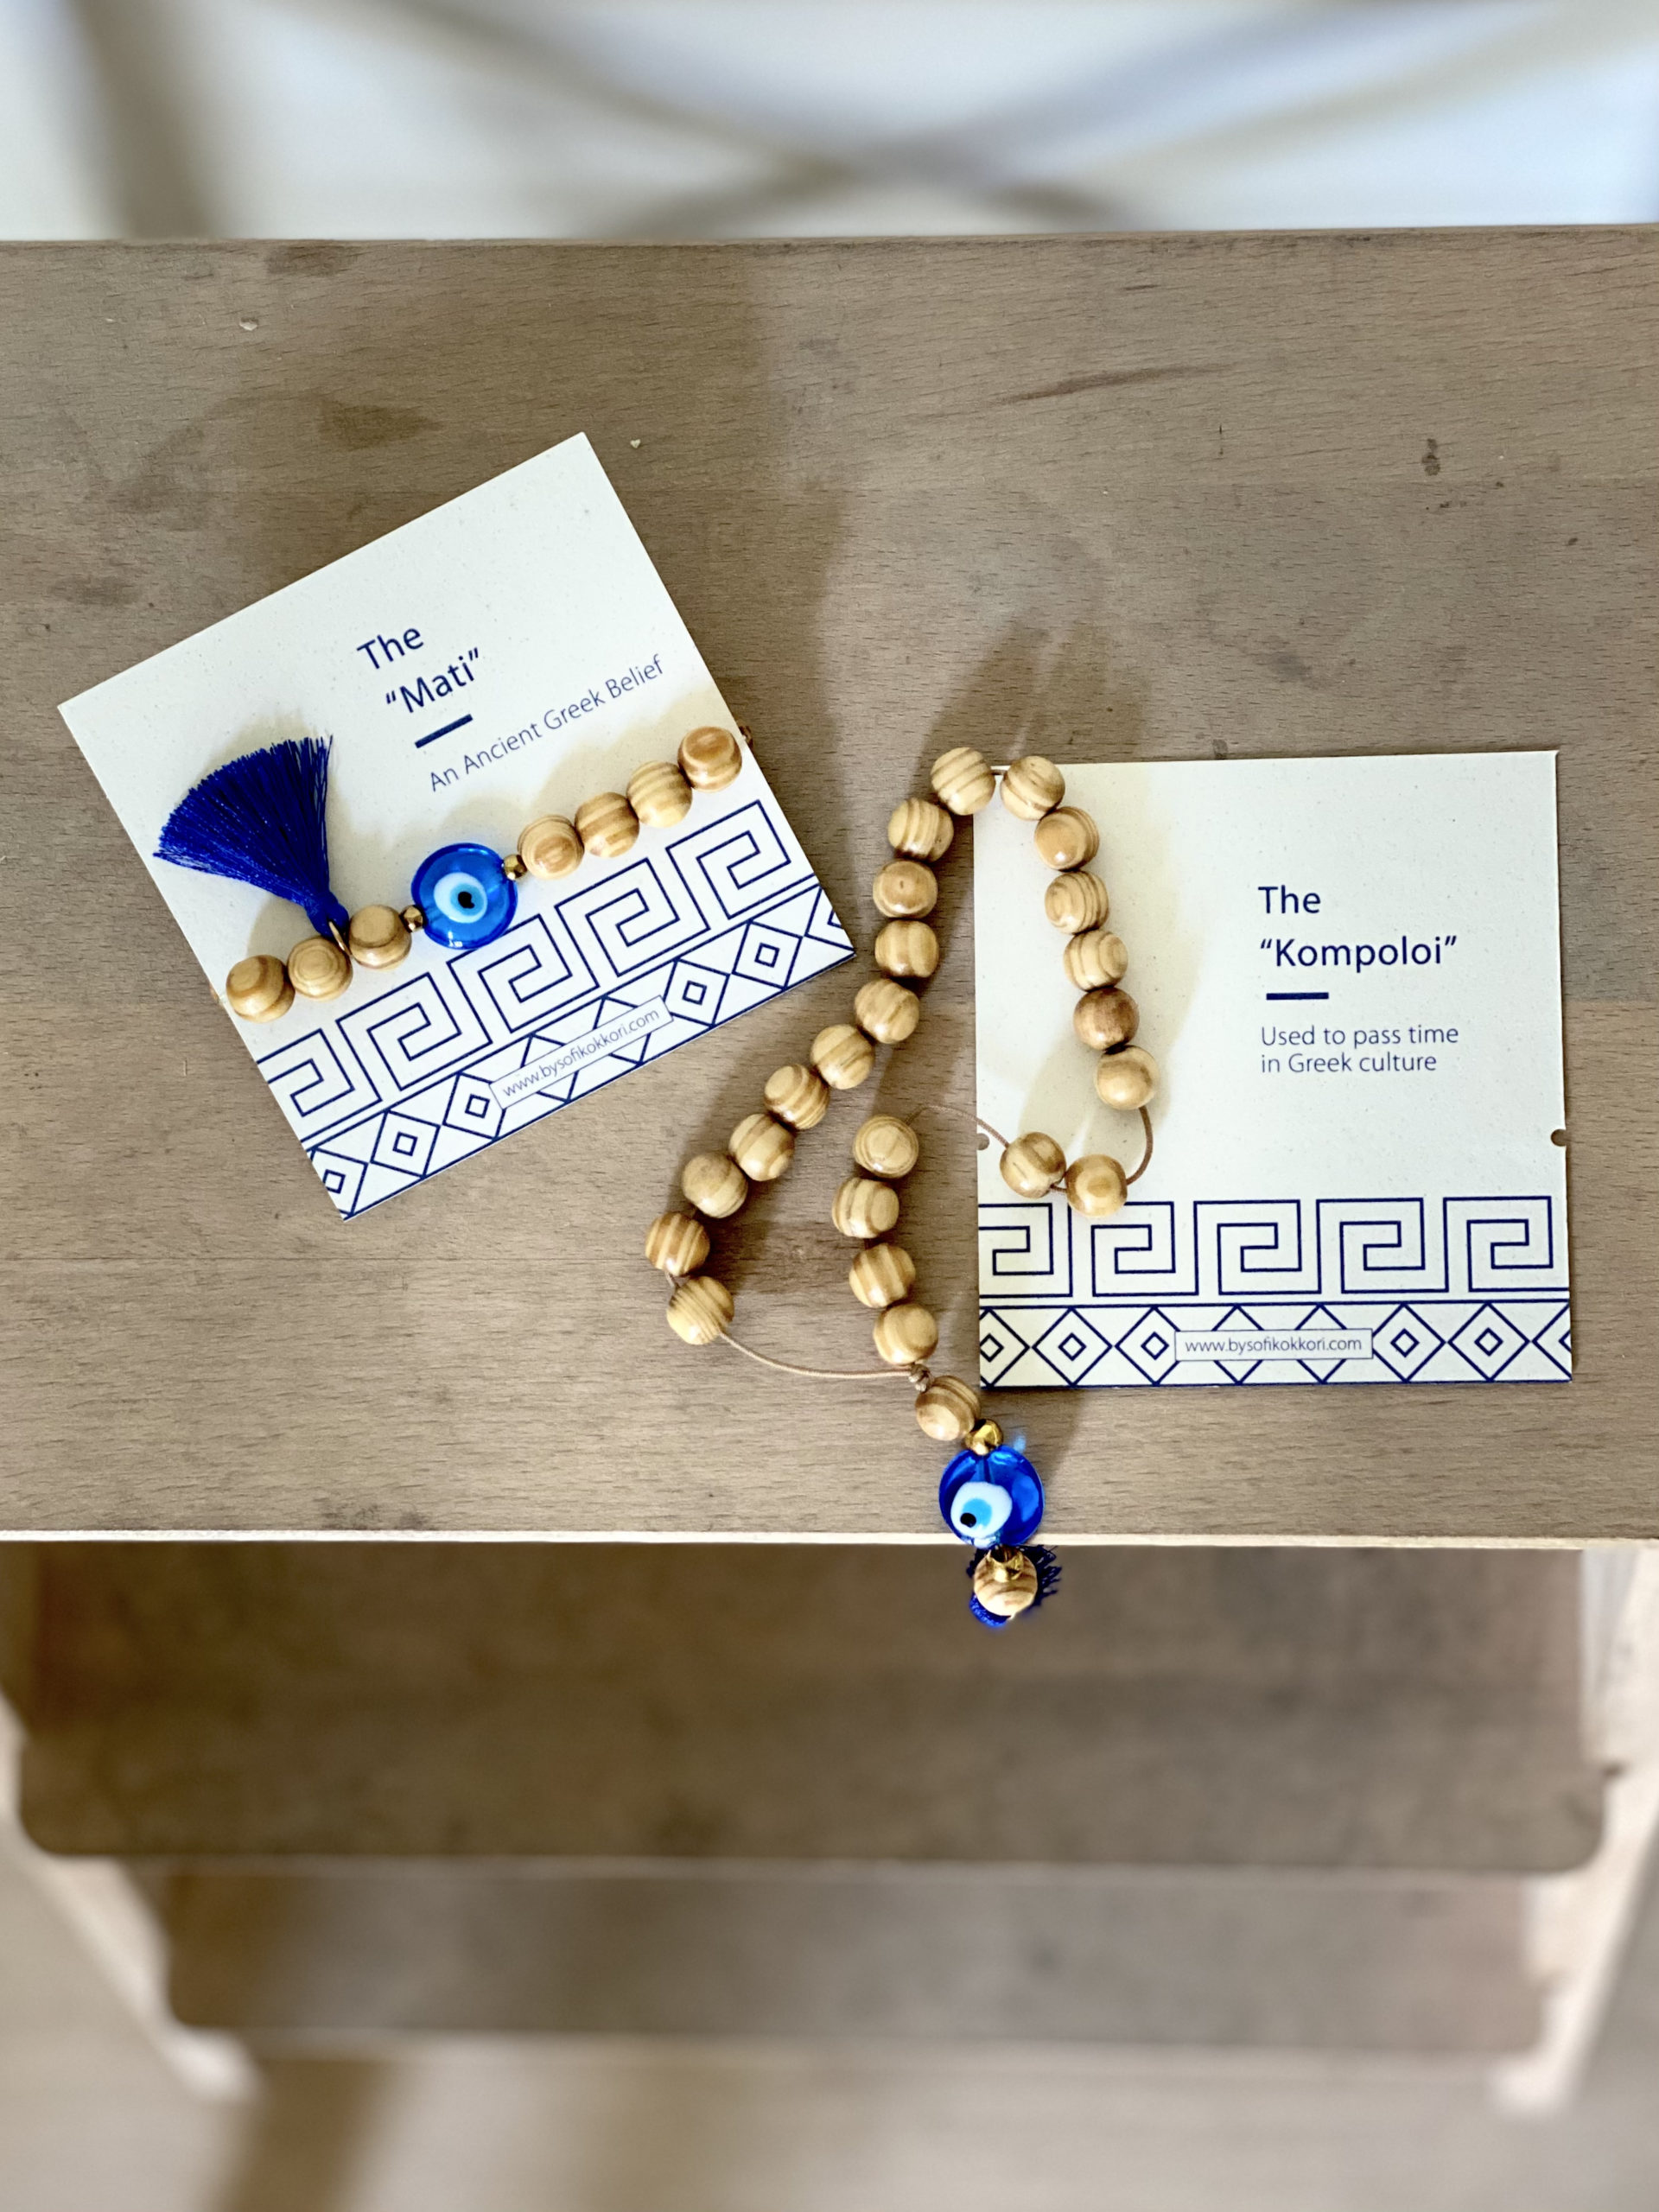 little-treasures-from-greece-wedding-welcome-gifts-evileye-bracelet-kompolo-with-card